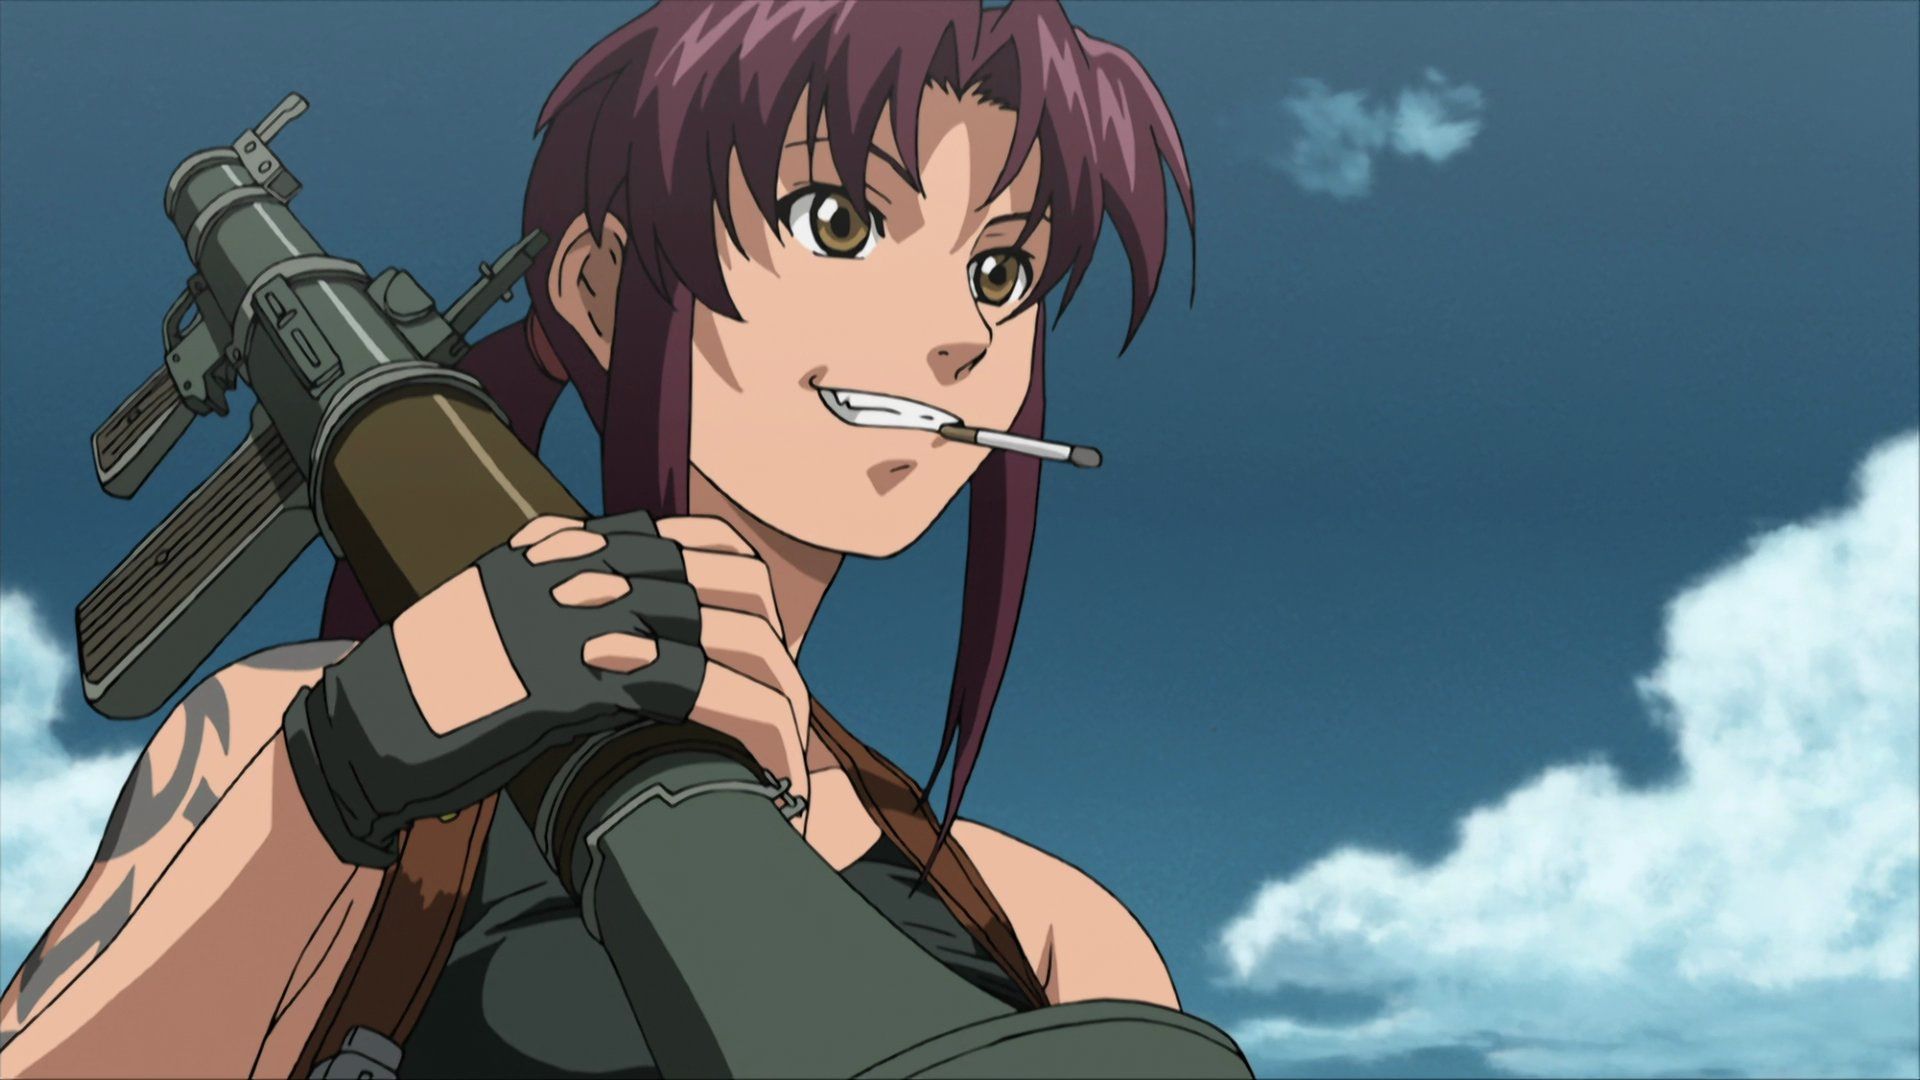 55 Badass Female Anime Characters - ReignOfReads